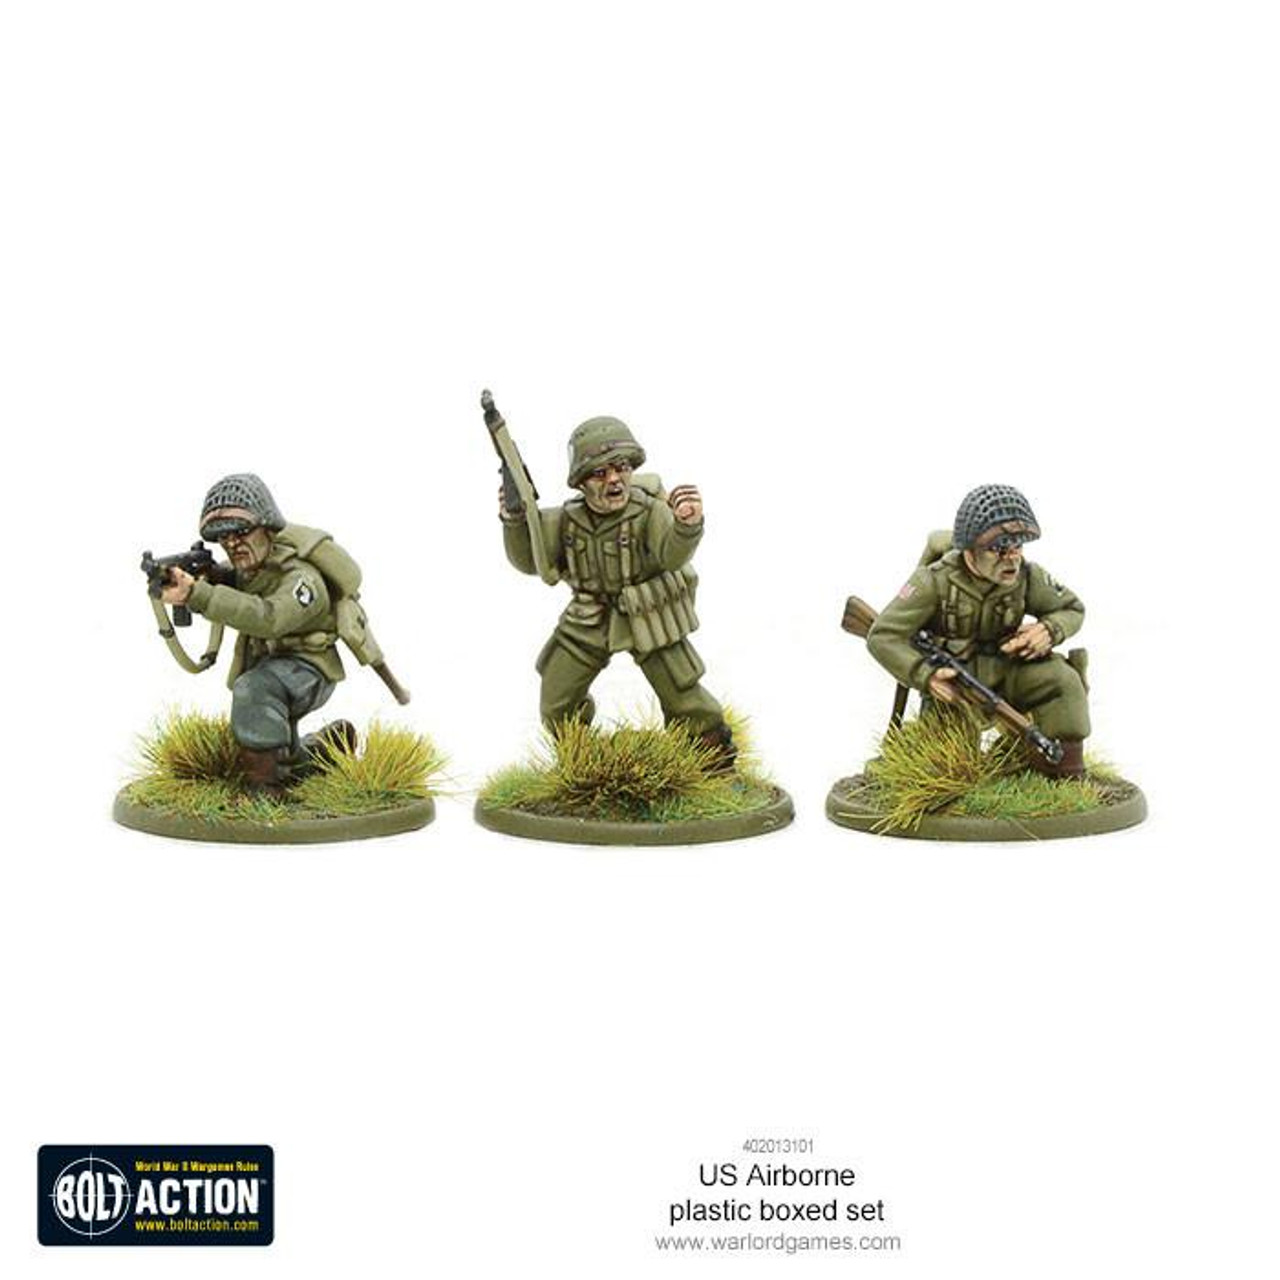 Bolt Action: US Airborne Paratroopers